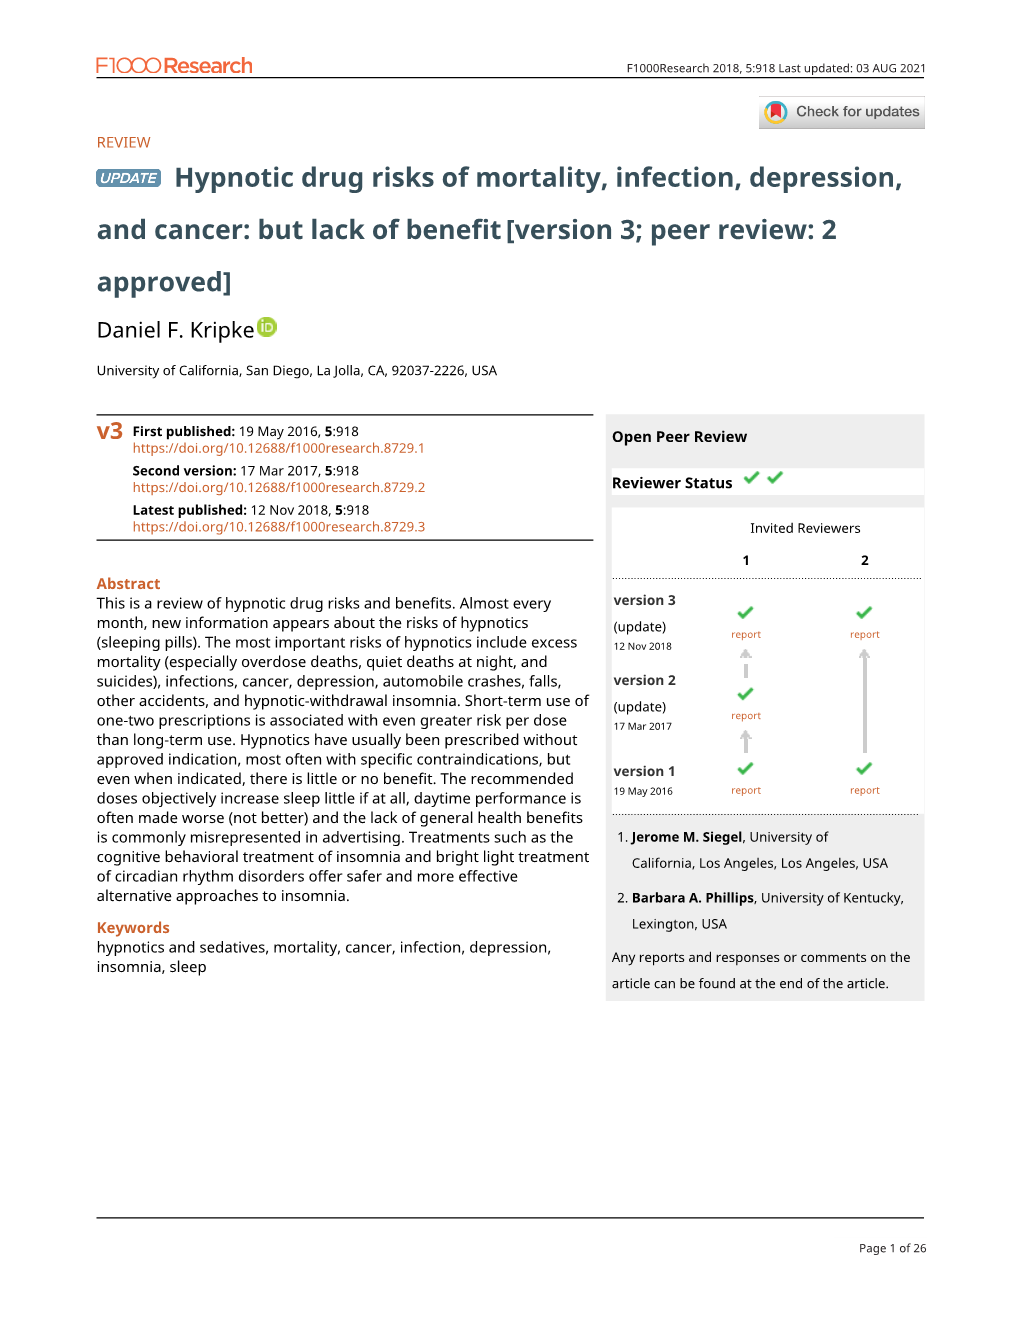 Hypnotic Drug Risks of Mortality, Infection, Depression, and Cancer: but Lack of Benefit [Version 3; Peer Review: 2 Approved]